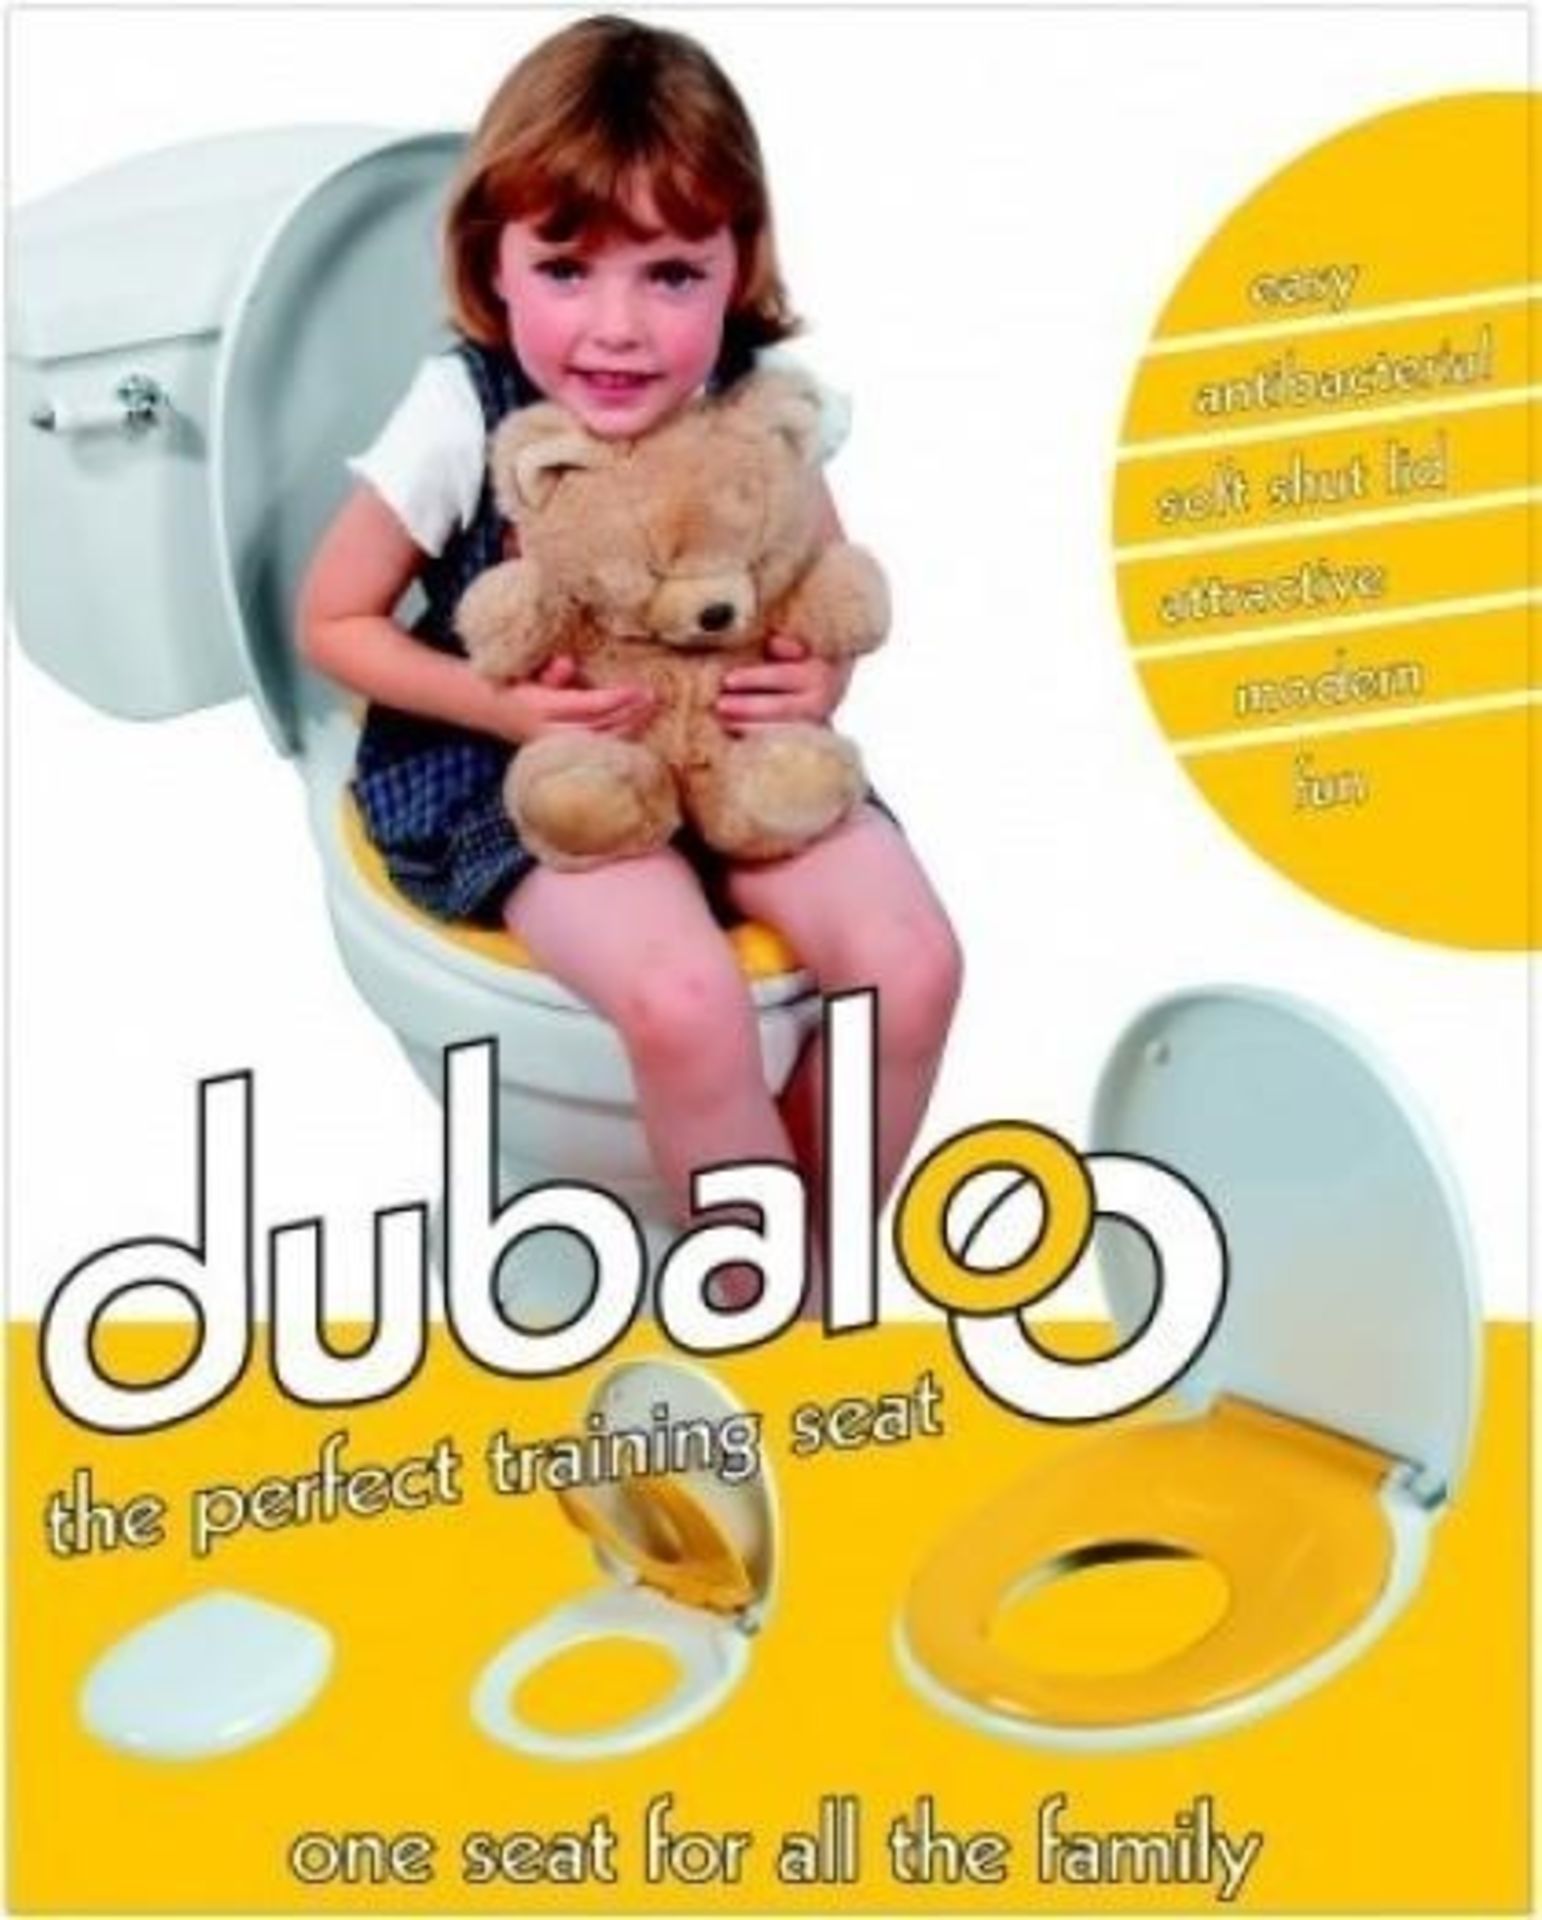 1 x Dubaloo 2 in 1 Family Training Toilet Seat - One Seat For All The Family - Full Size Toilet Seat - Image 3 of 3